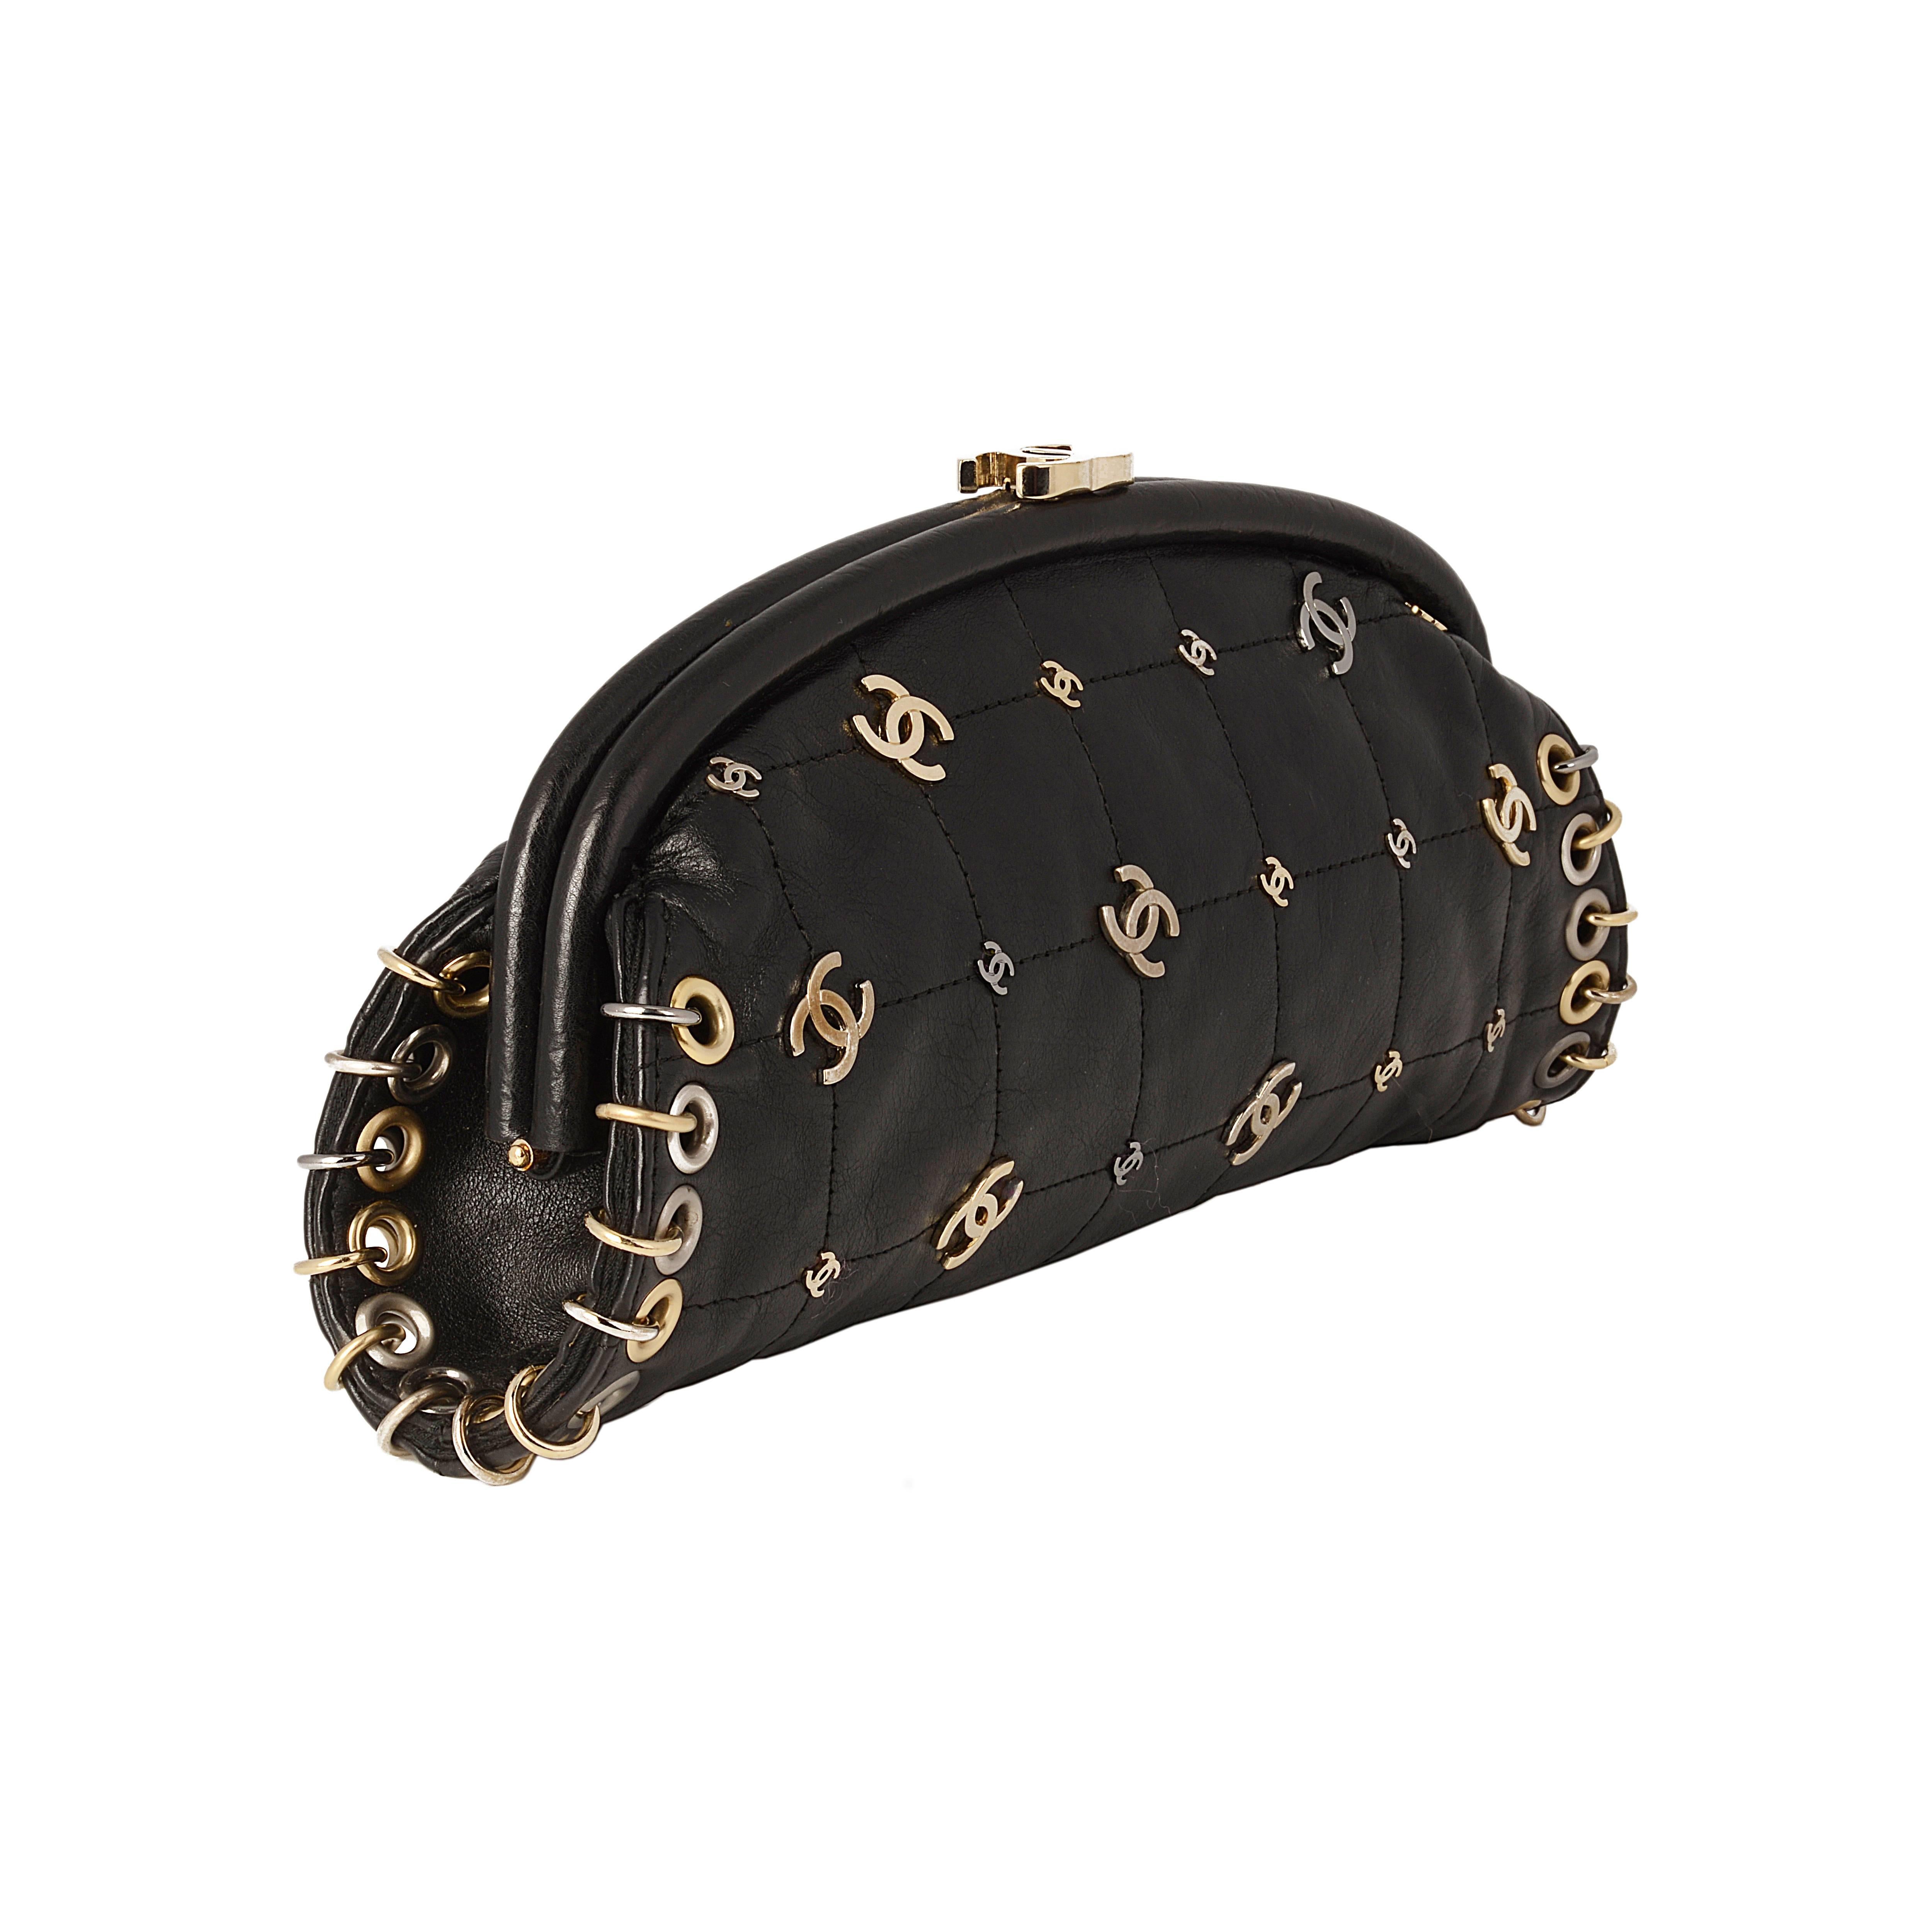 This unique Chanel pochette is crafted from black leather, featuring an internal zipped pocket. The exterior is adorned with the iconic interlocking 'CC' logo and edged with gold rings. This clutch bag is finished with a logo clip locking